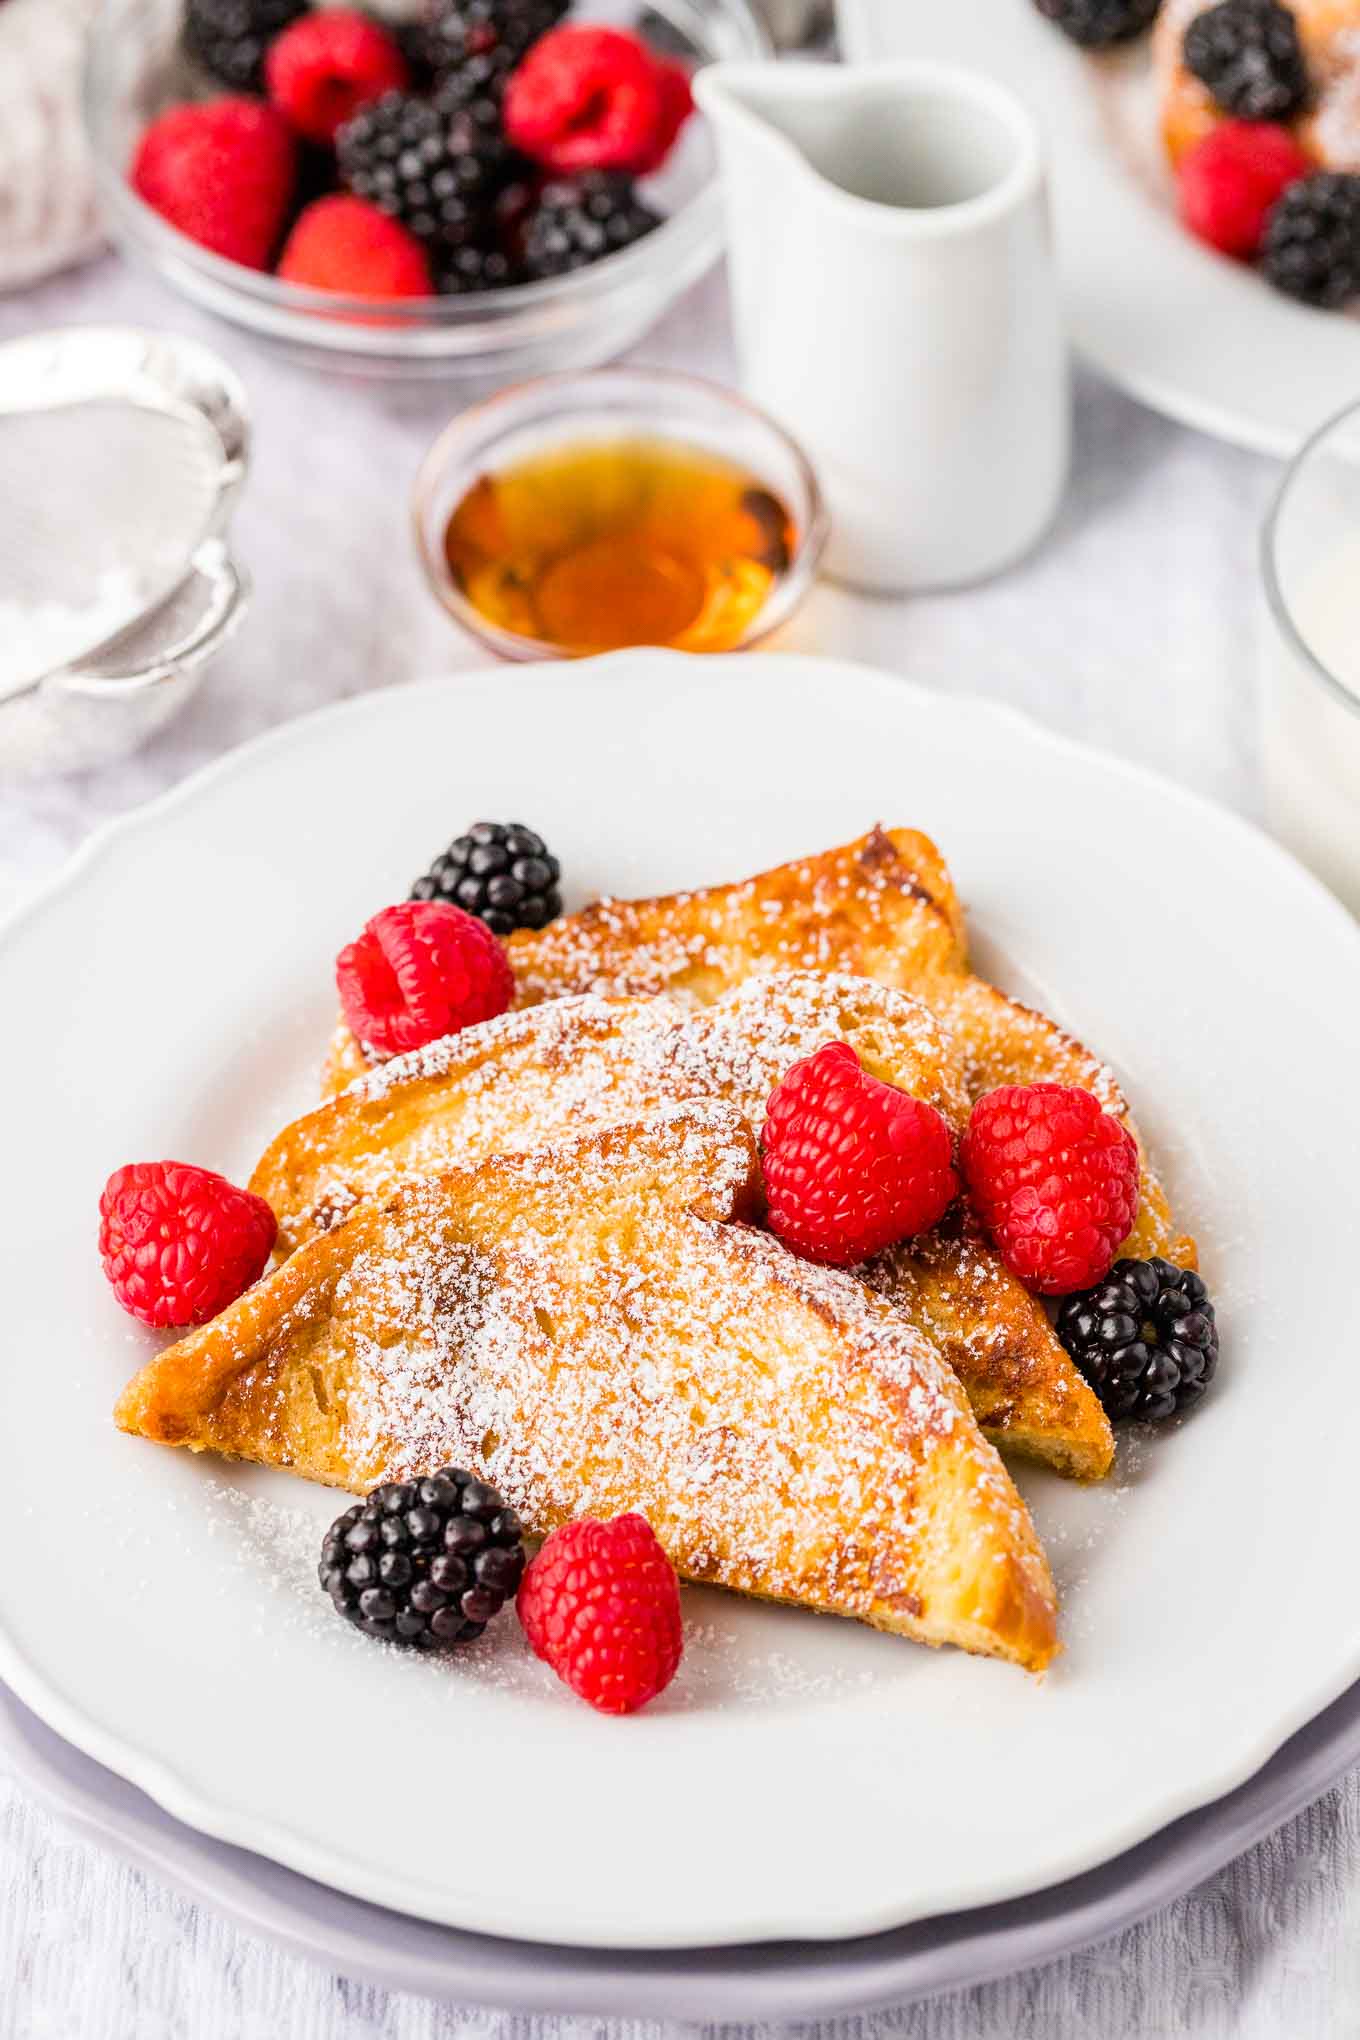 French toast garnished with powdered sugar and berries on a white plate.